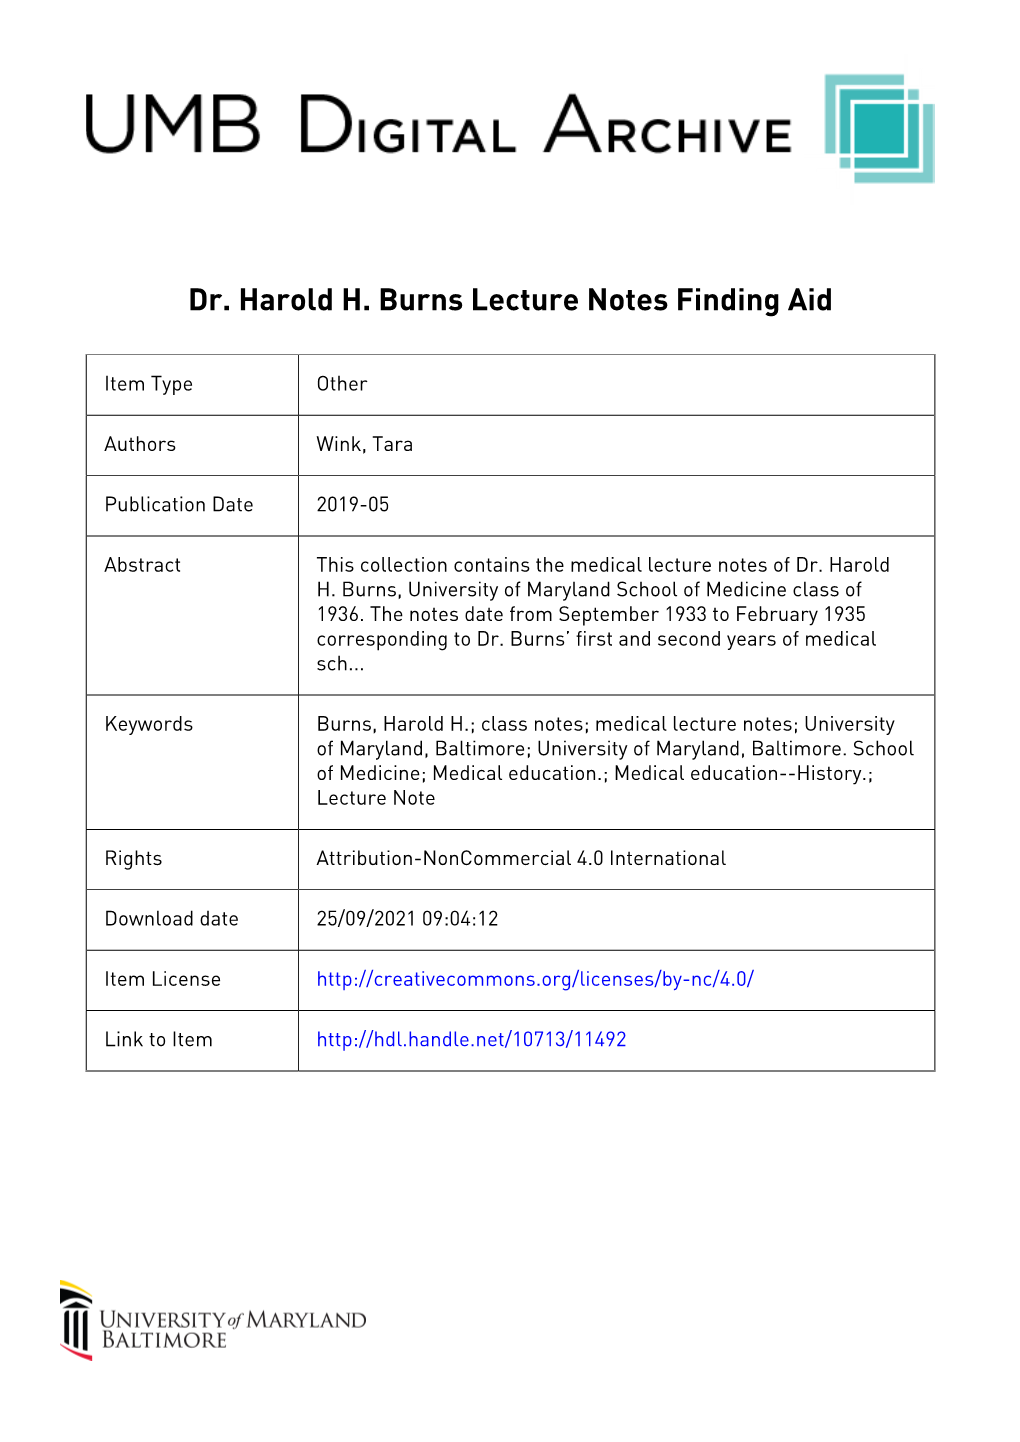 Dr. Harold H. Burns Lecture Notes Finding Aid